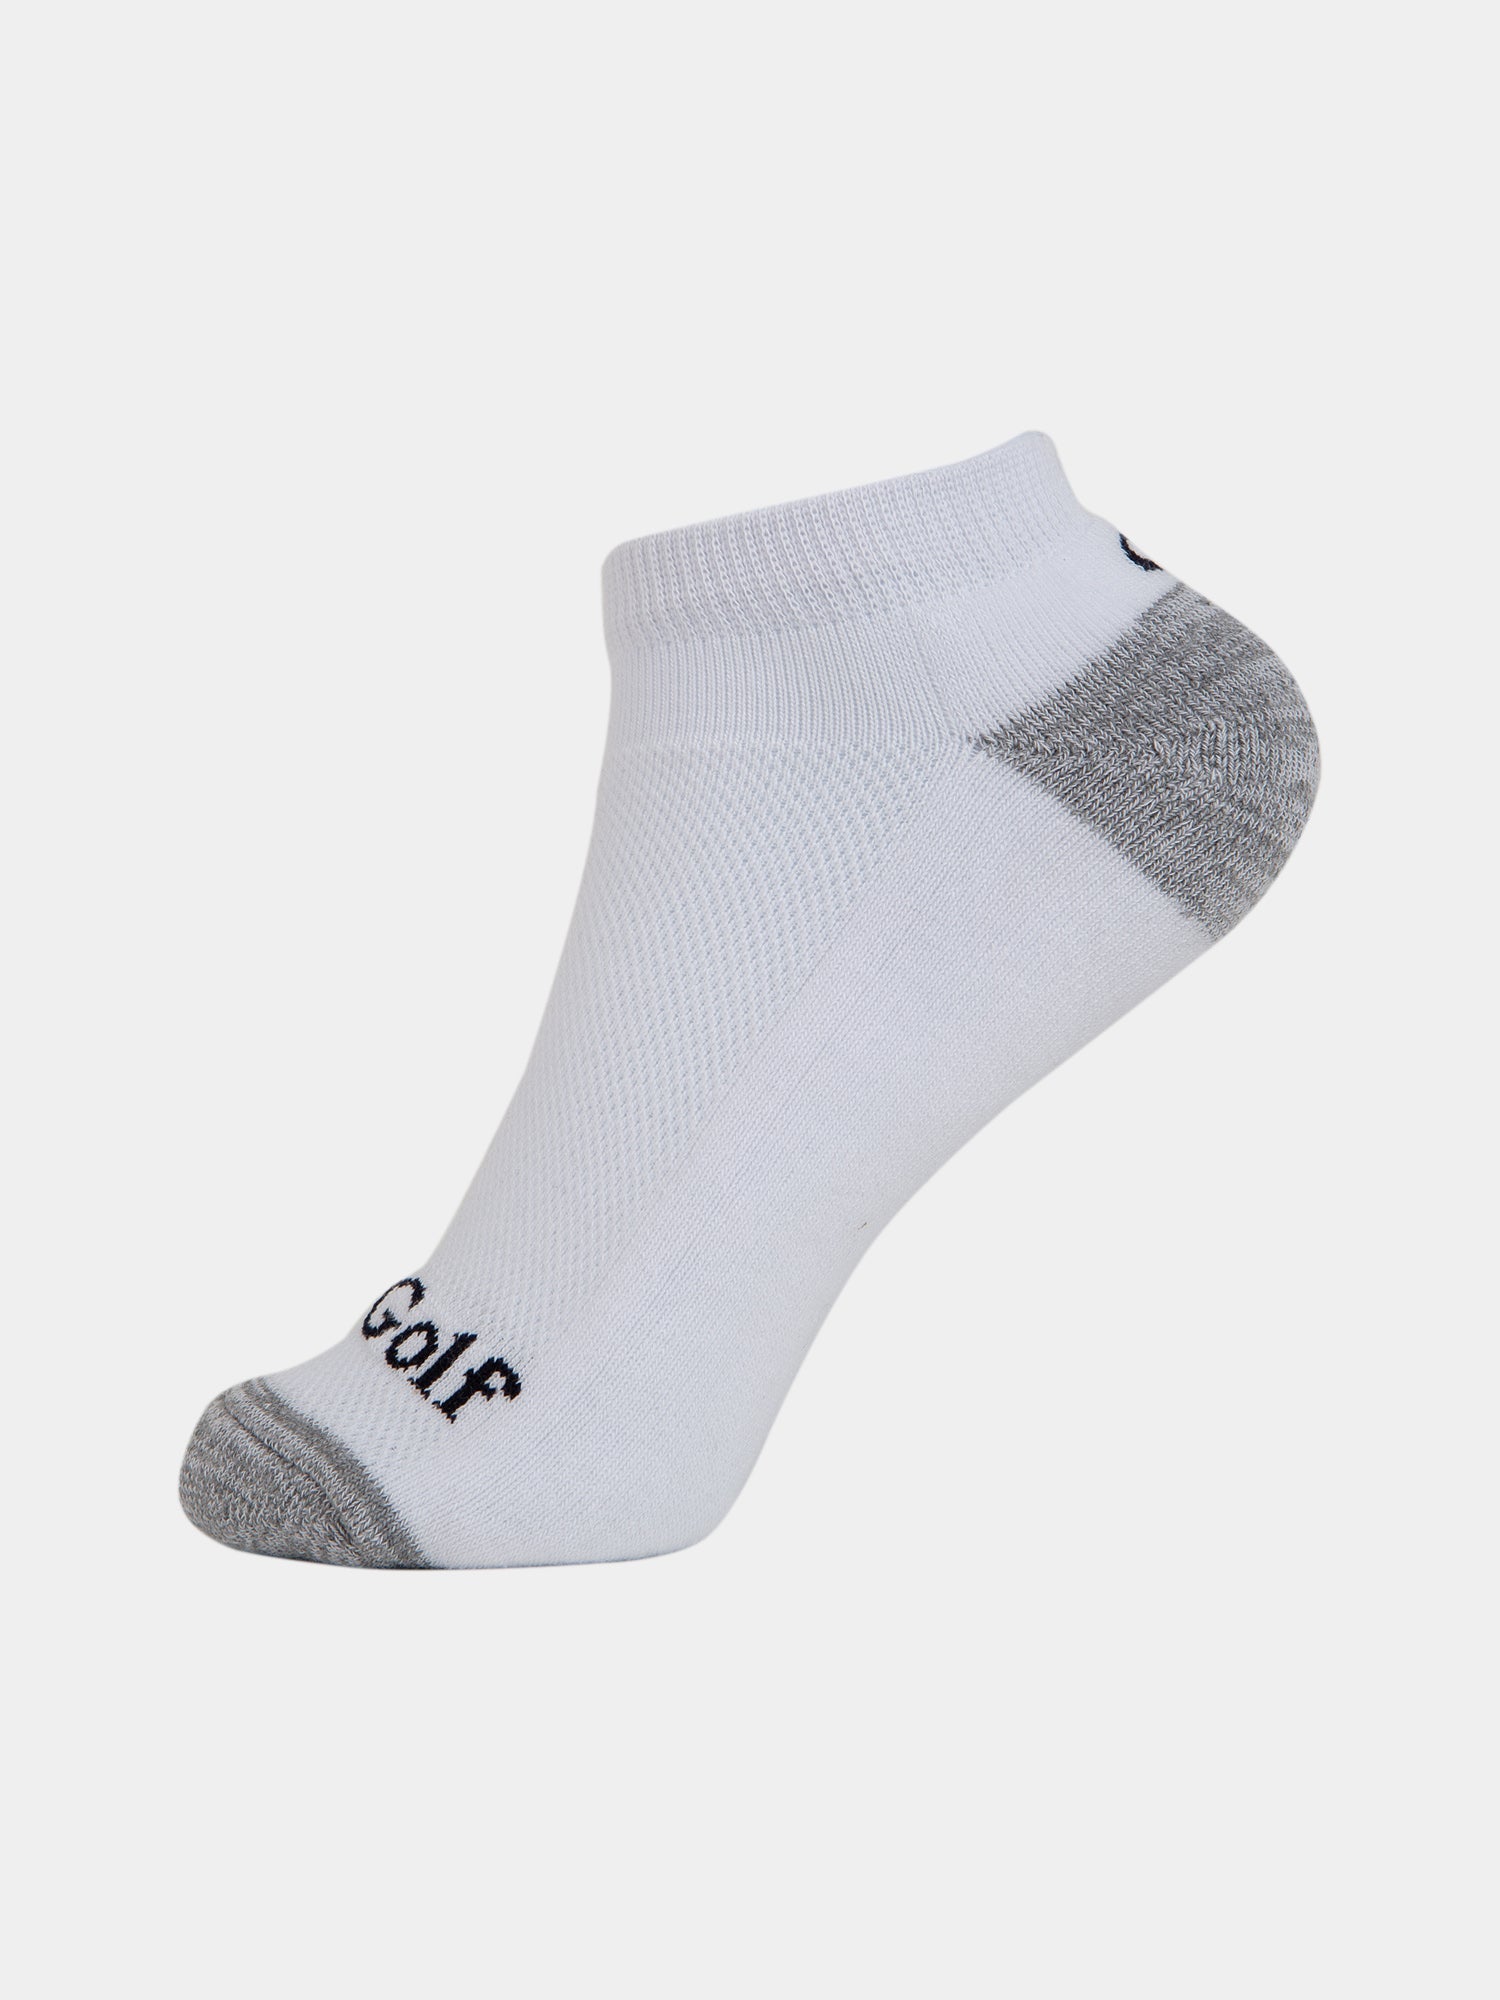 Mens Performance Sports Ankle Sock – 2 Pack